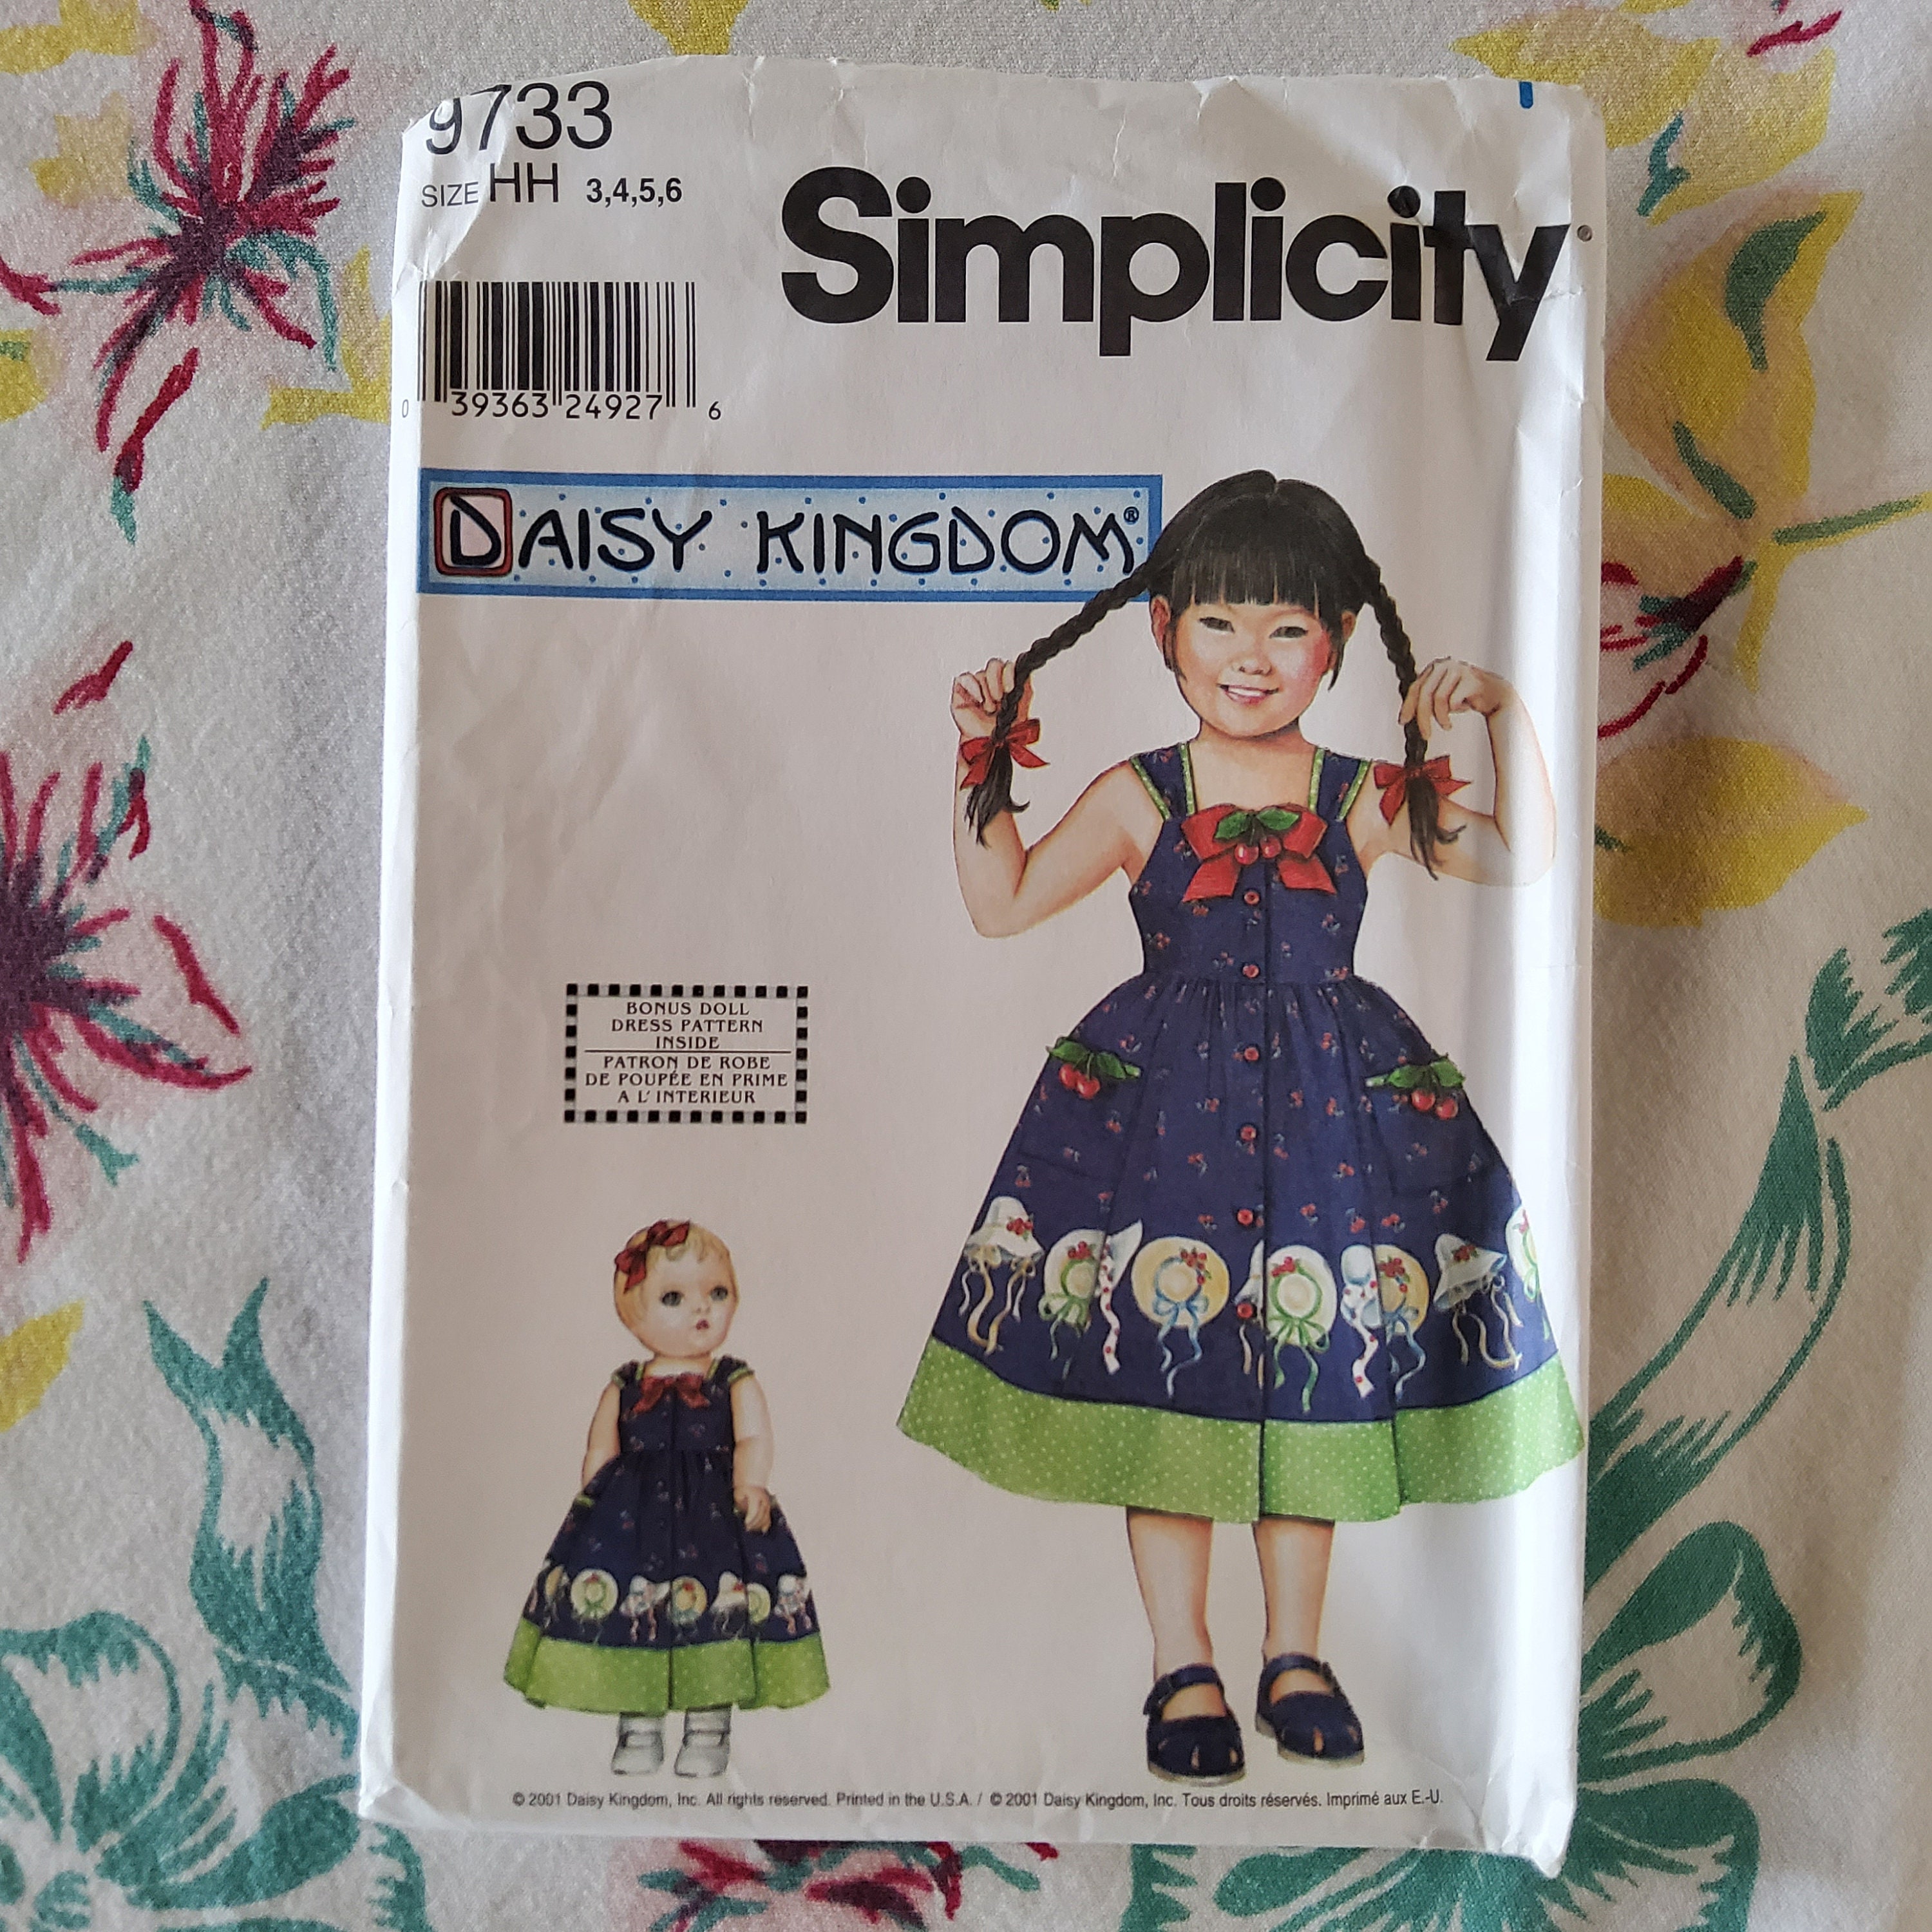 Simplicity 9607 Complete Uncut Factory Folds Sewing Pattern for Dummies  Kisd Summer Tops Shorts Capris Size 3 4 5 6 Chest 22-25 